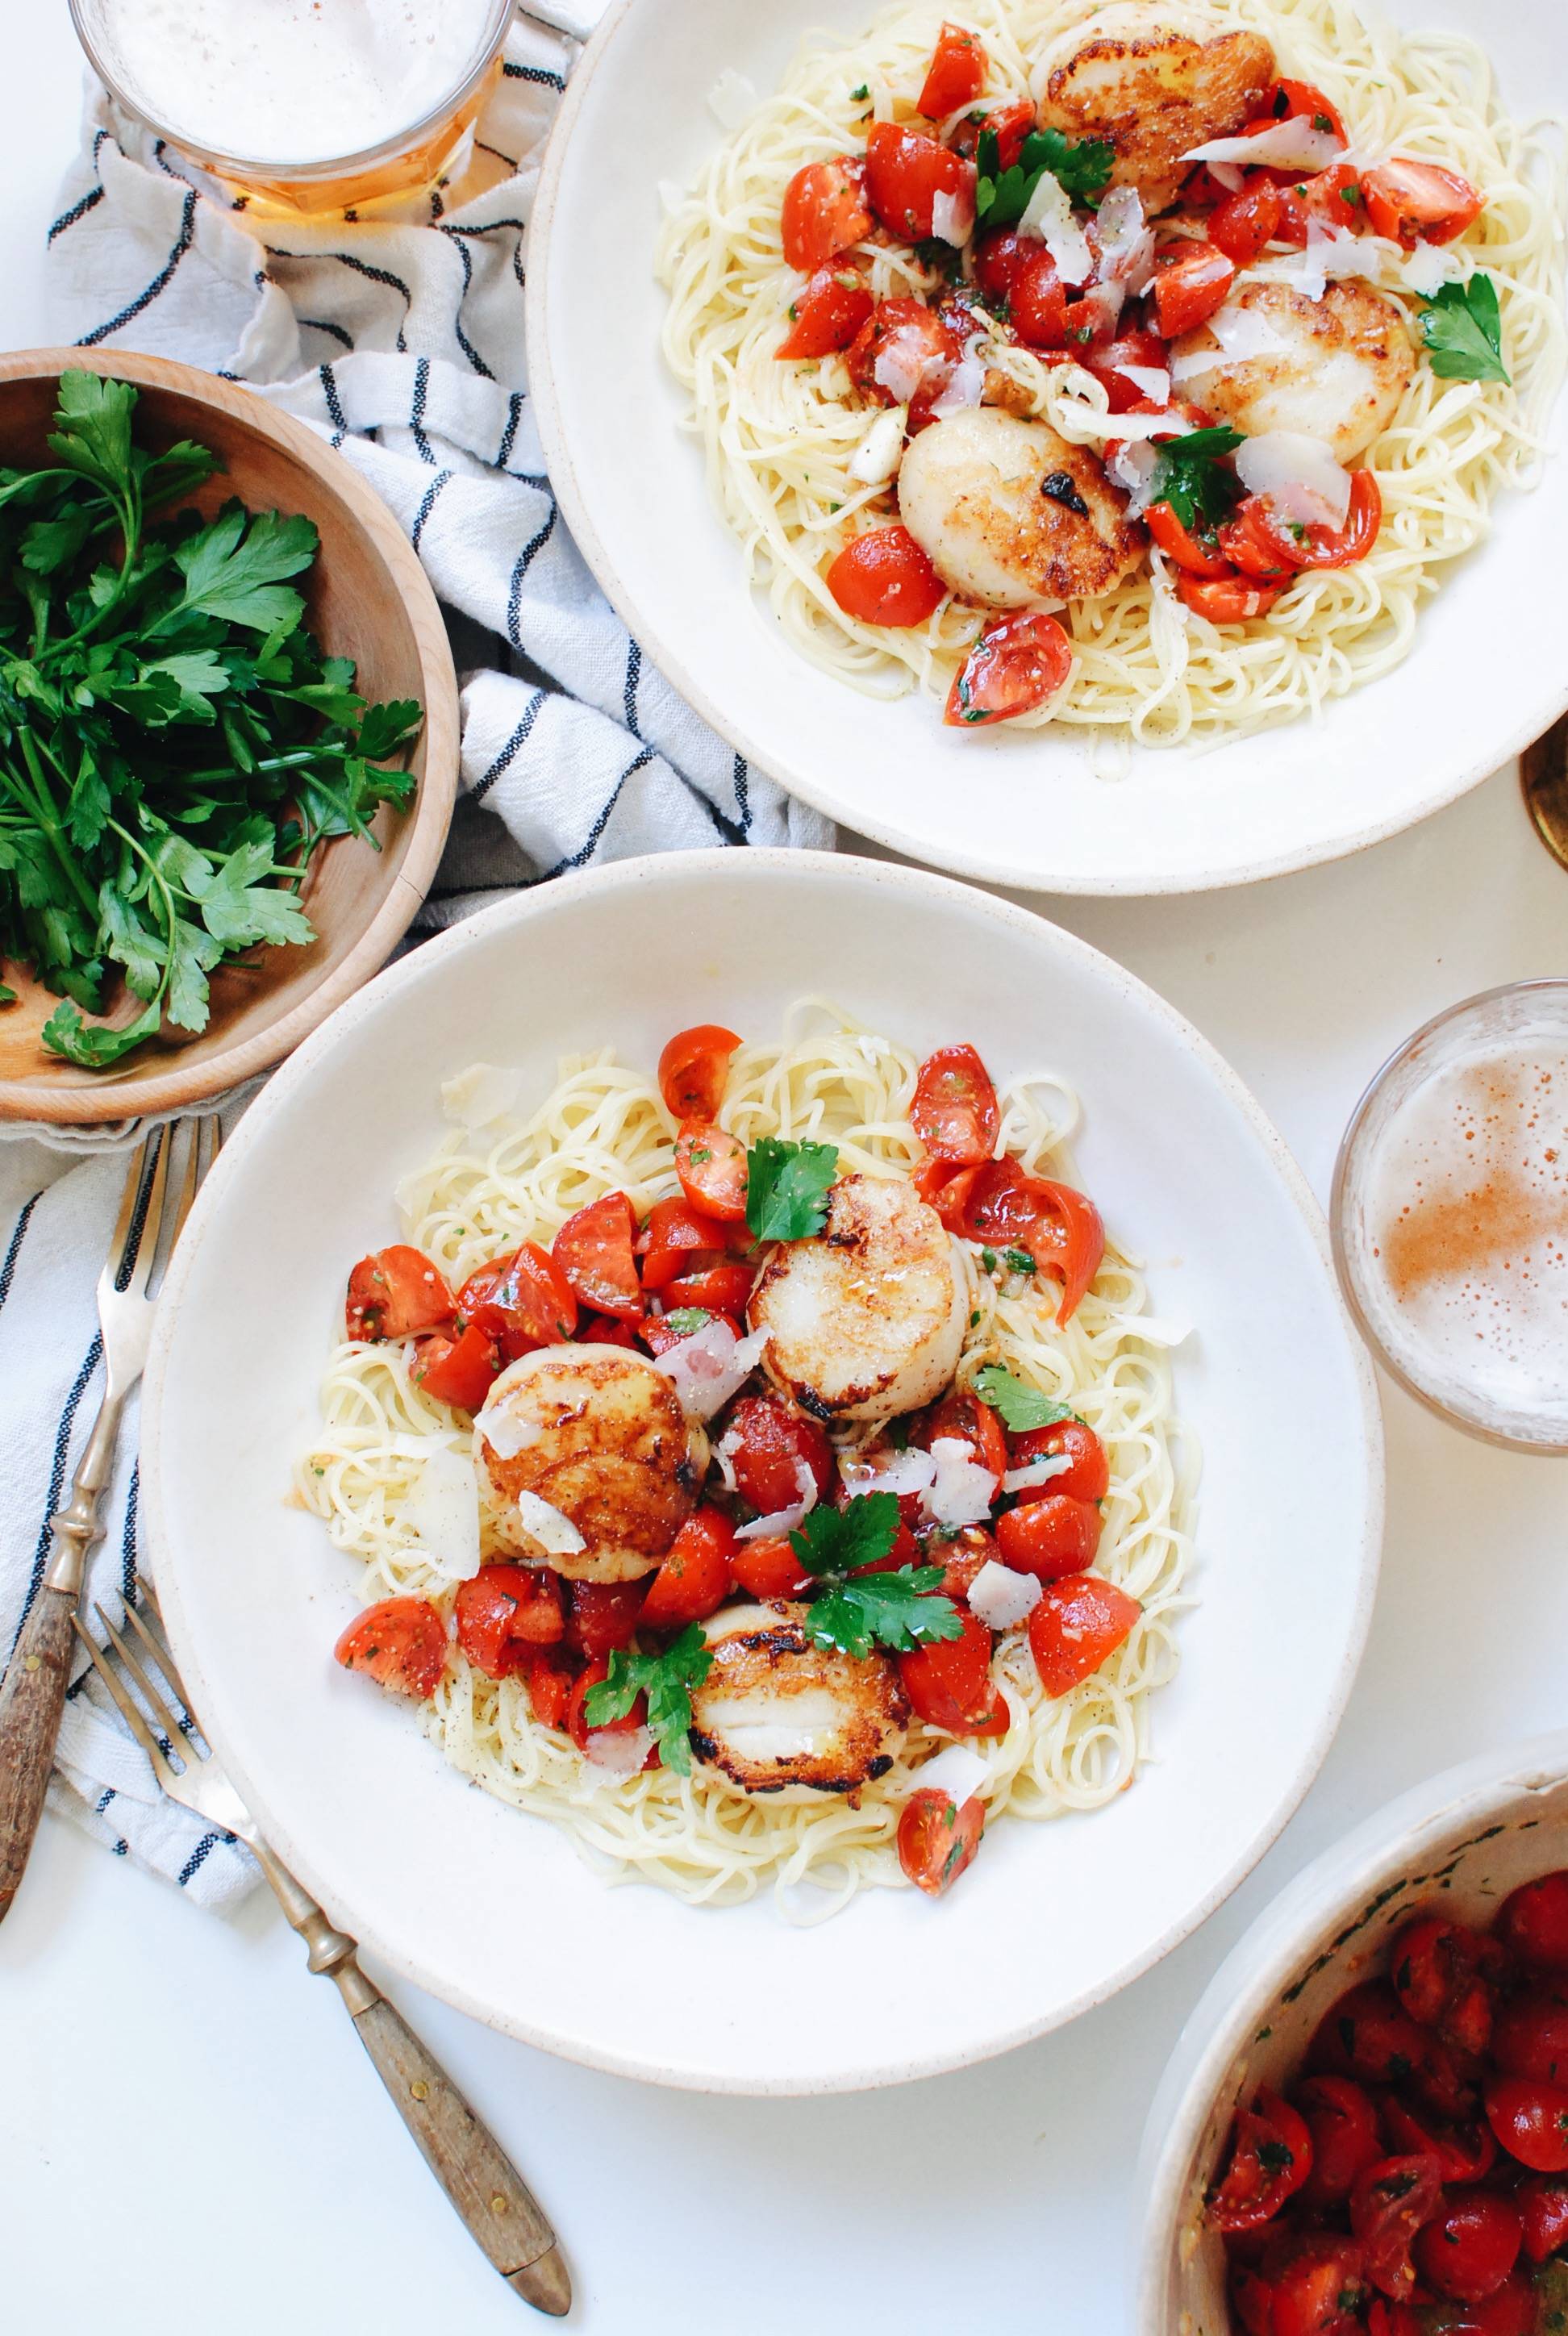 Capellini Pasta With Marinated Tomatoes And Seared Scallops